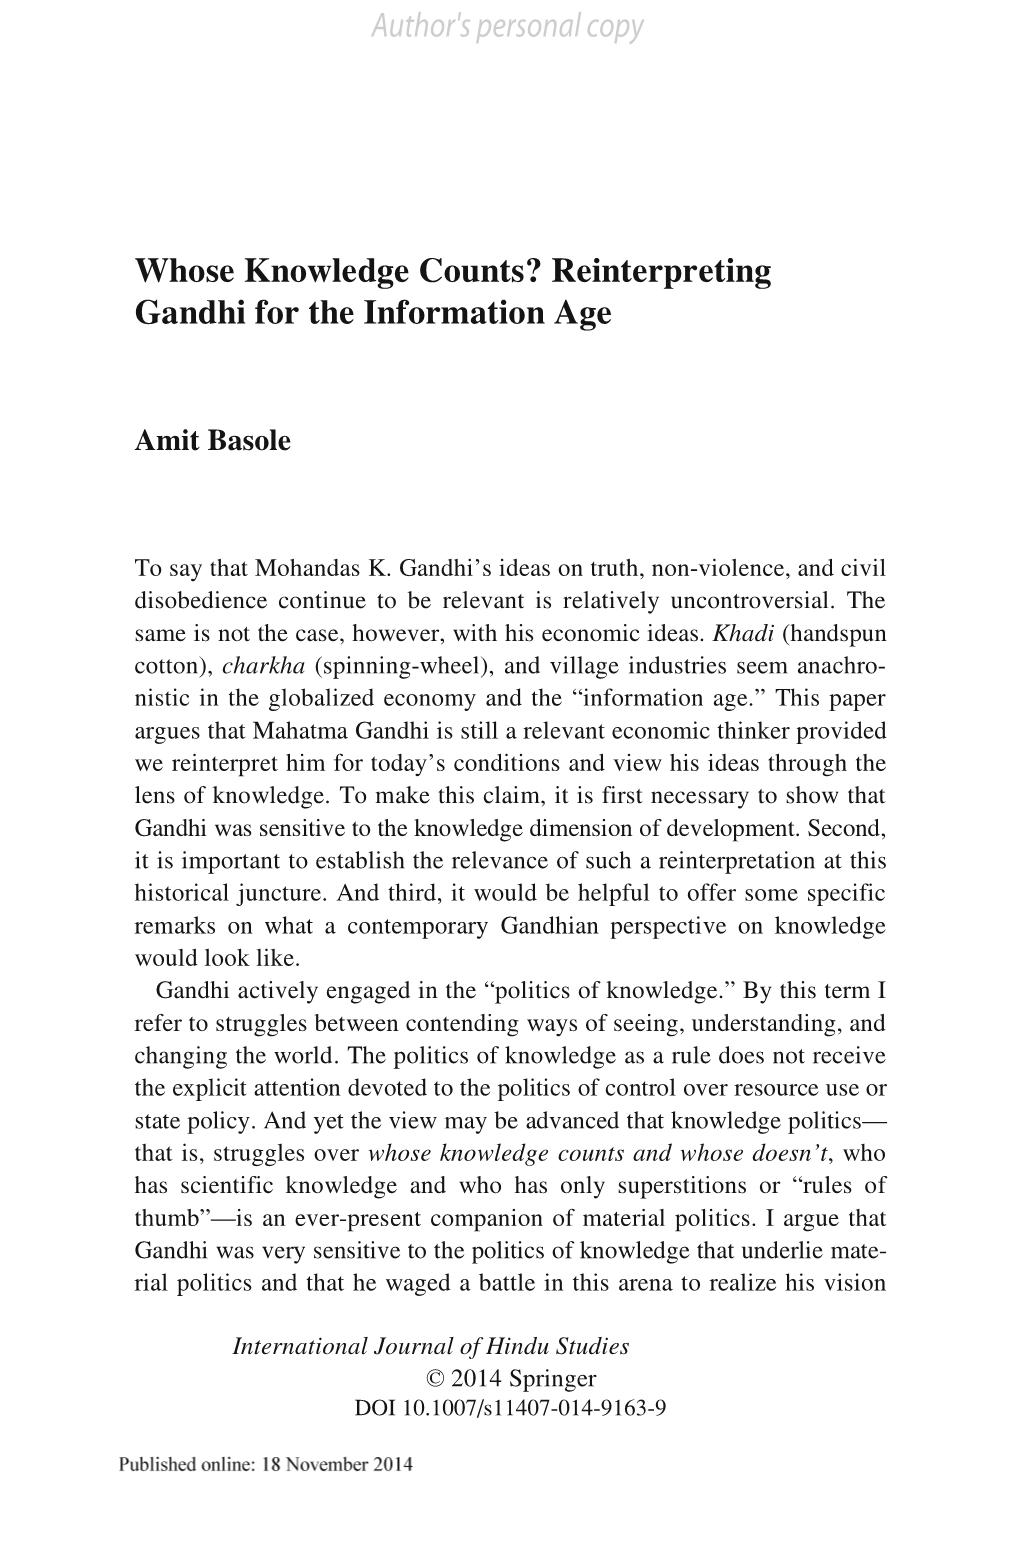 Reinterpreting Gandhi for the Information Age Author's Personal